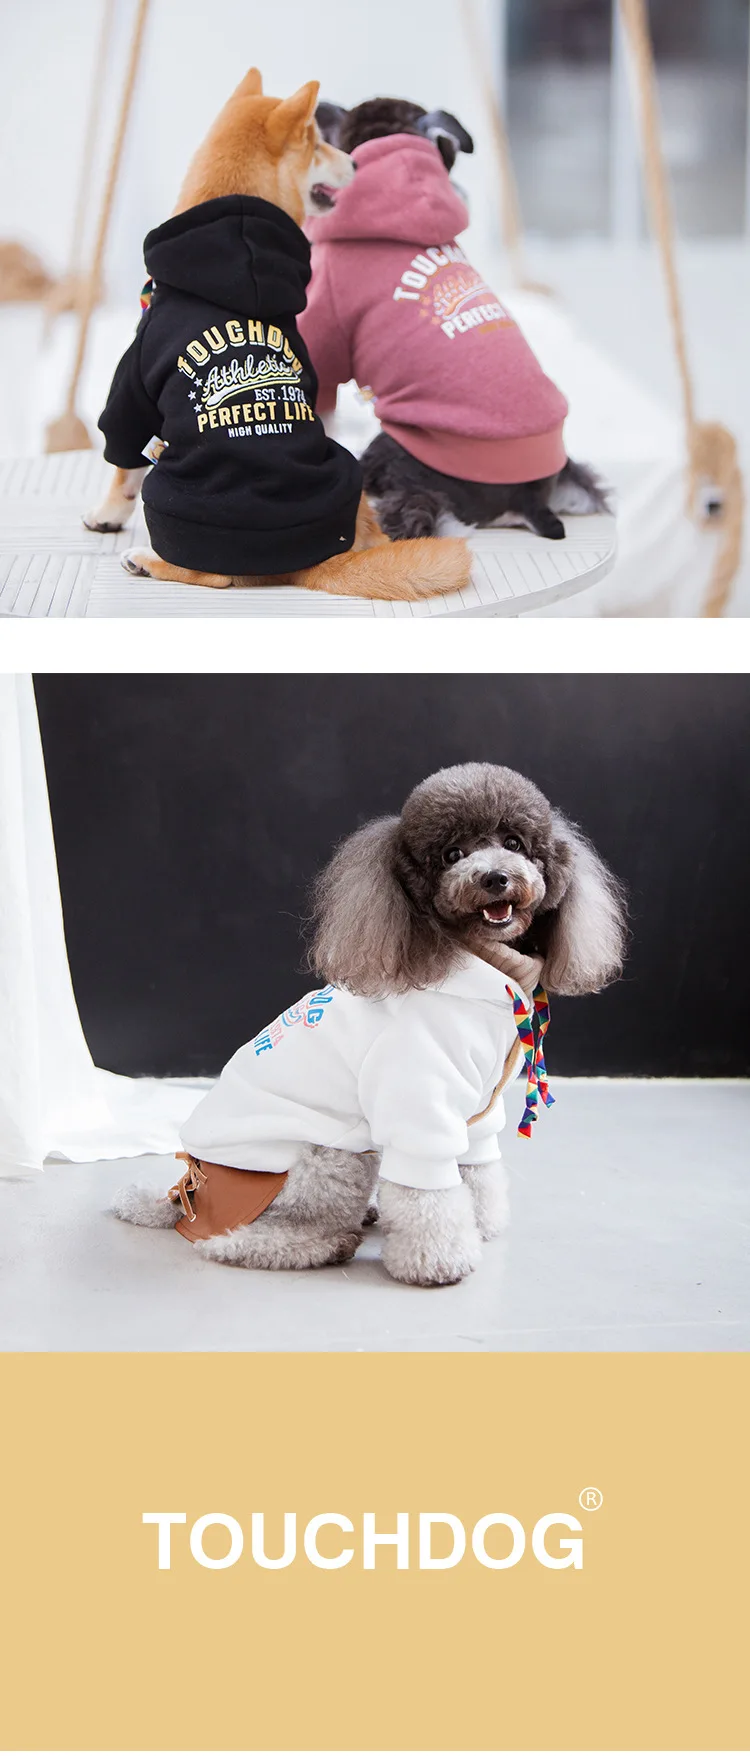 Touchdog 2019 Autumn And Winter New Style Pet Clothes Art Coffee Hoodie Dog Clothes Cat Clothes Aliexpress